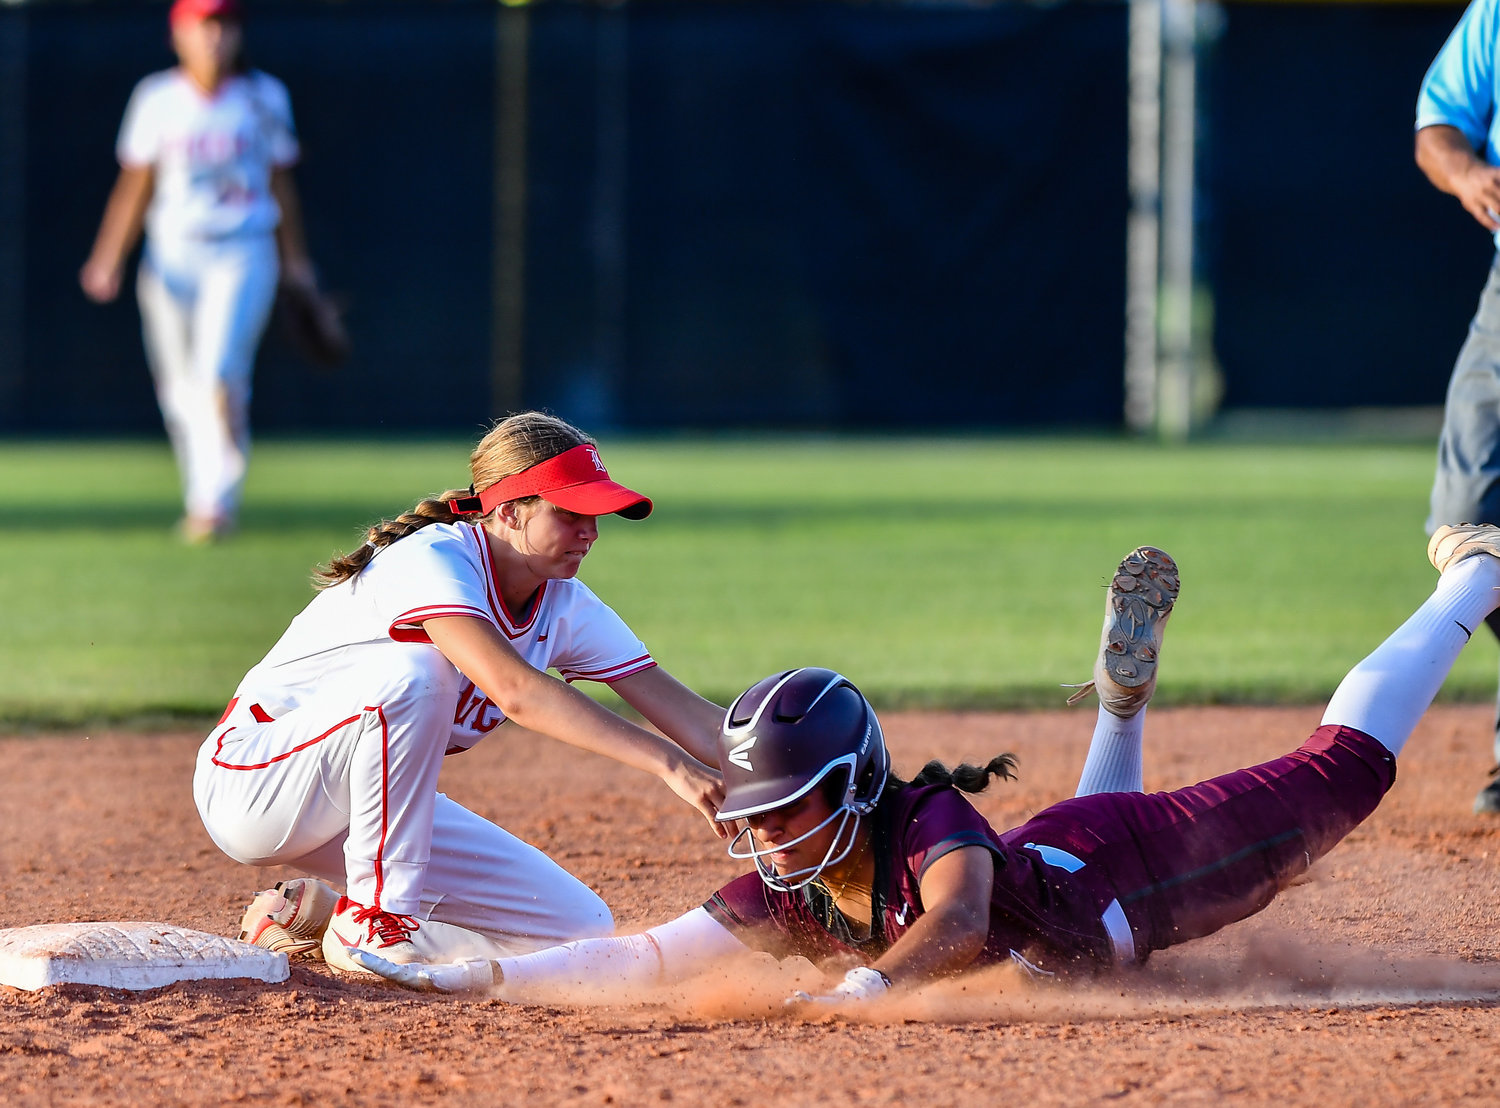 May 13, 2022: Katy's Avery Porter #12 makes the tag on Cinco Ranch's Gissel Morales #7 for the out during the Regional Quarterfinal playoff between Katy and Cinco Ranch at Katy HS. (Photo by Mark Goodman / Katy Times)